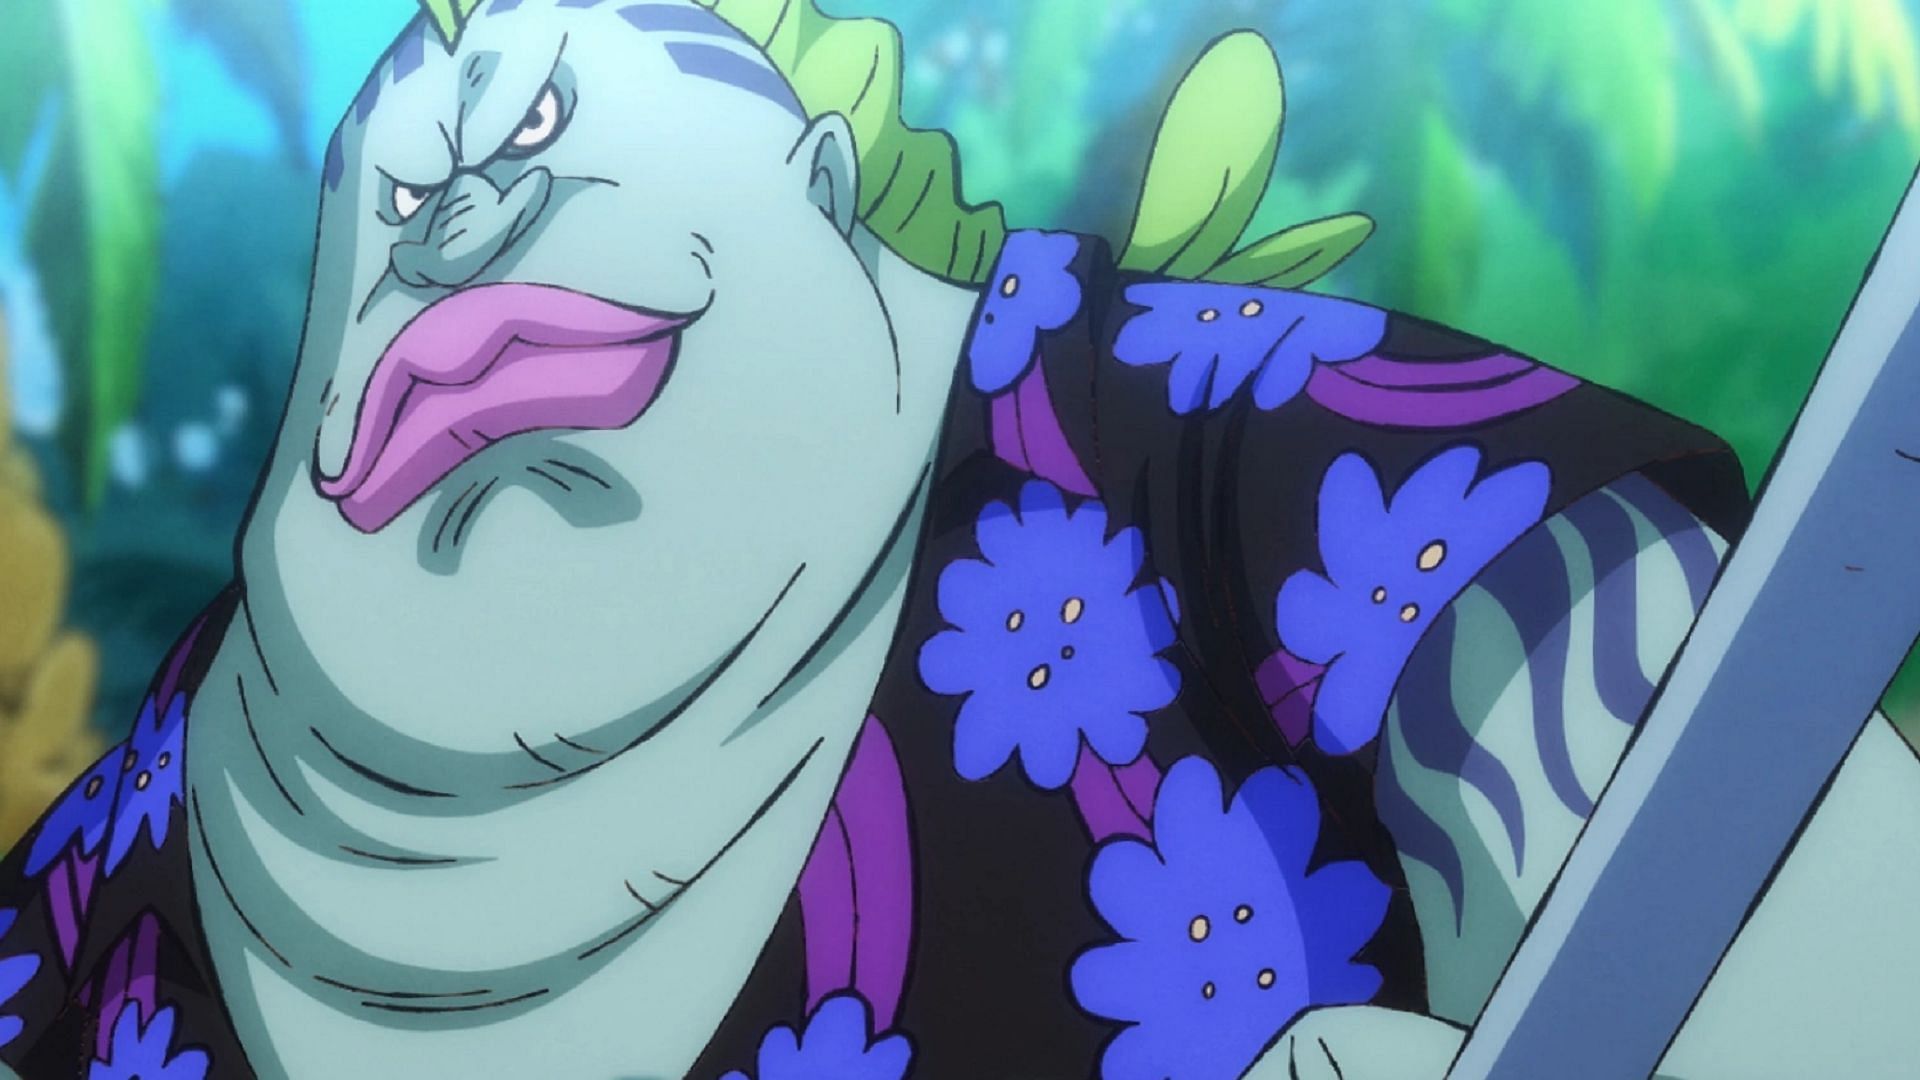 Sunbell as seen in the One Piece anime (Image via Toei Animation, One Piece)